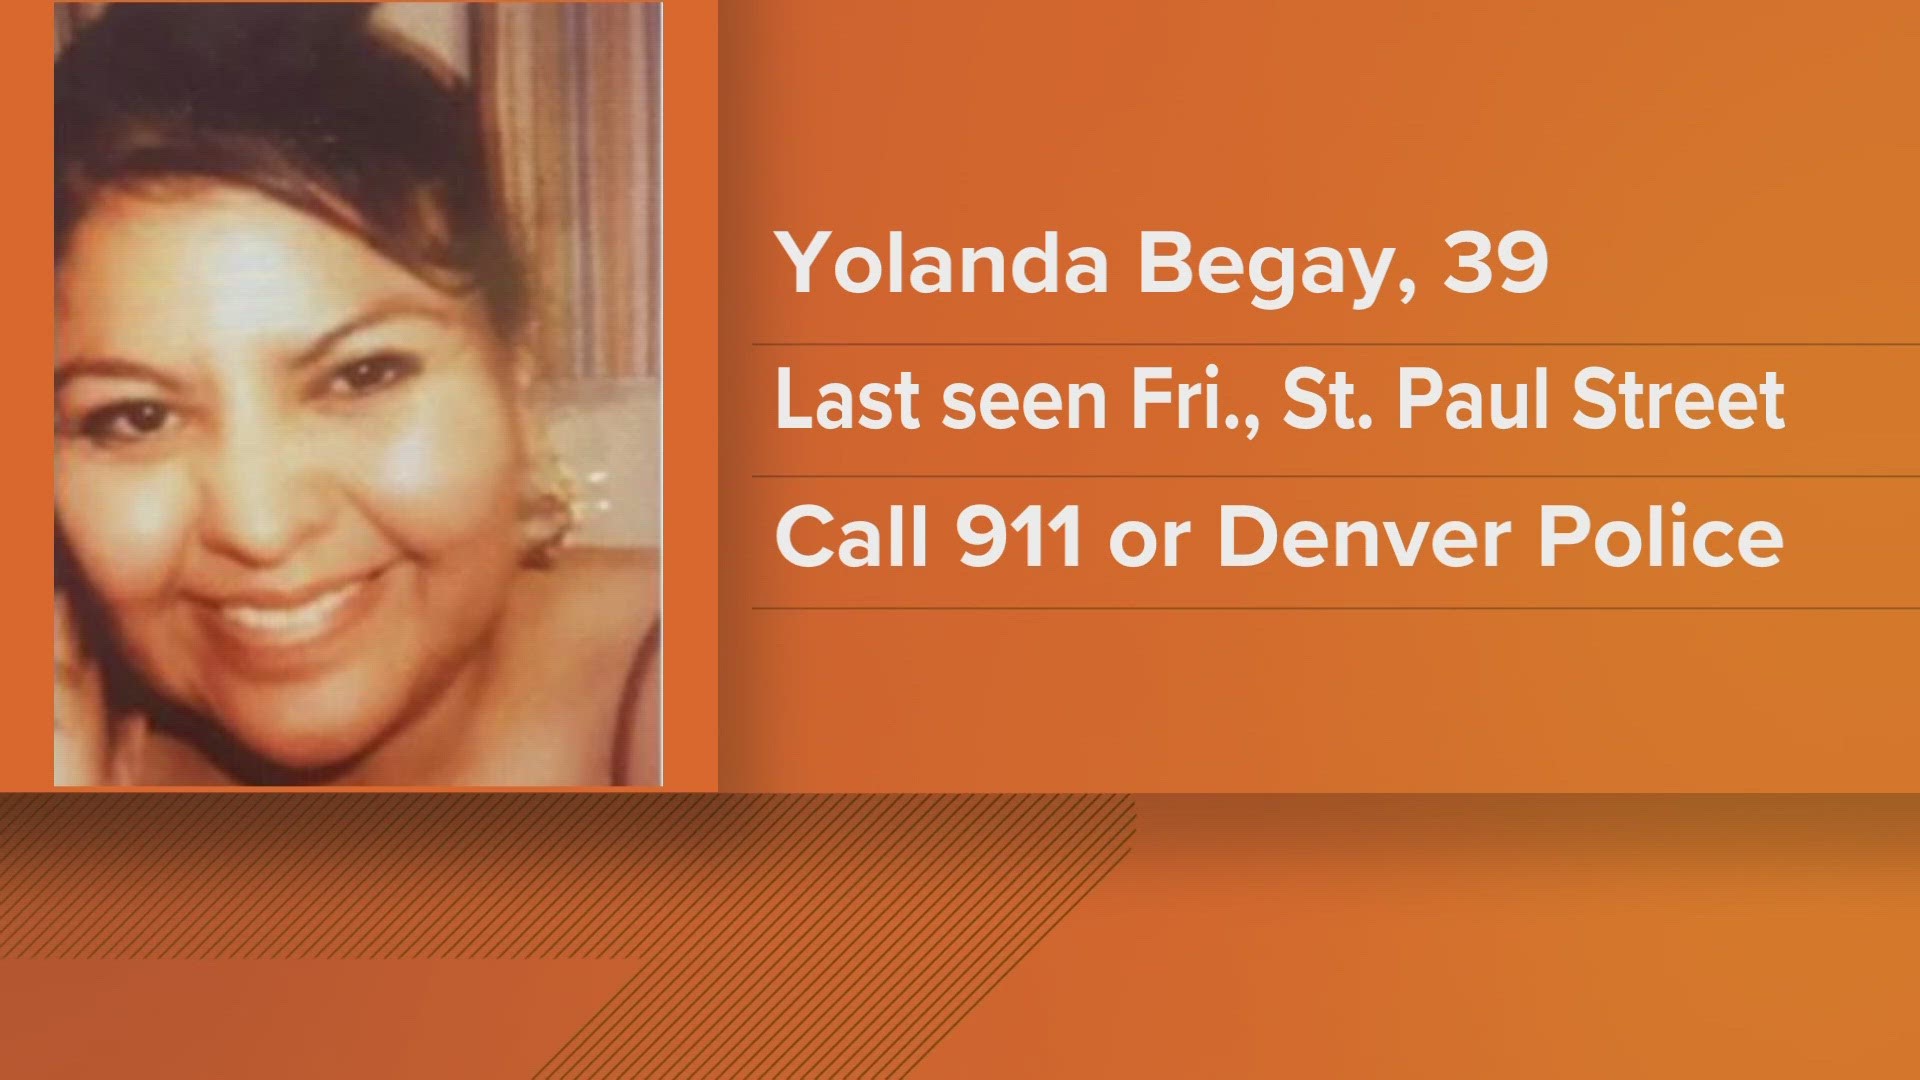 The CBI issued a Missing Indigenous Person alert for 39-year-old Yolanda Begay, who was last seen around 10 p.m. in the 5100 block of N. Paul St. in Denver.